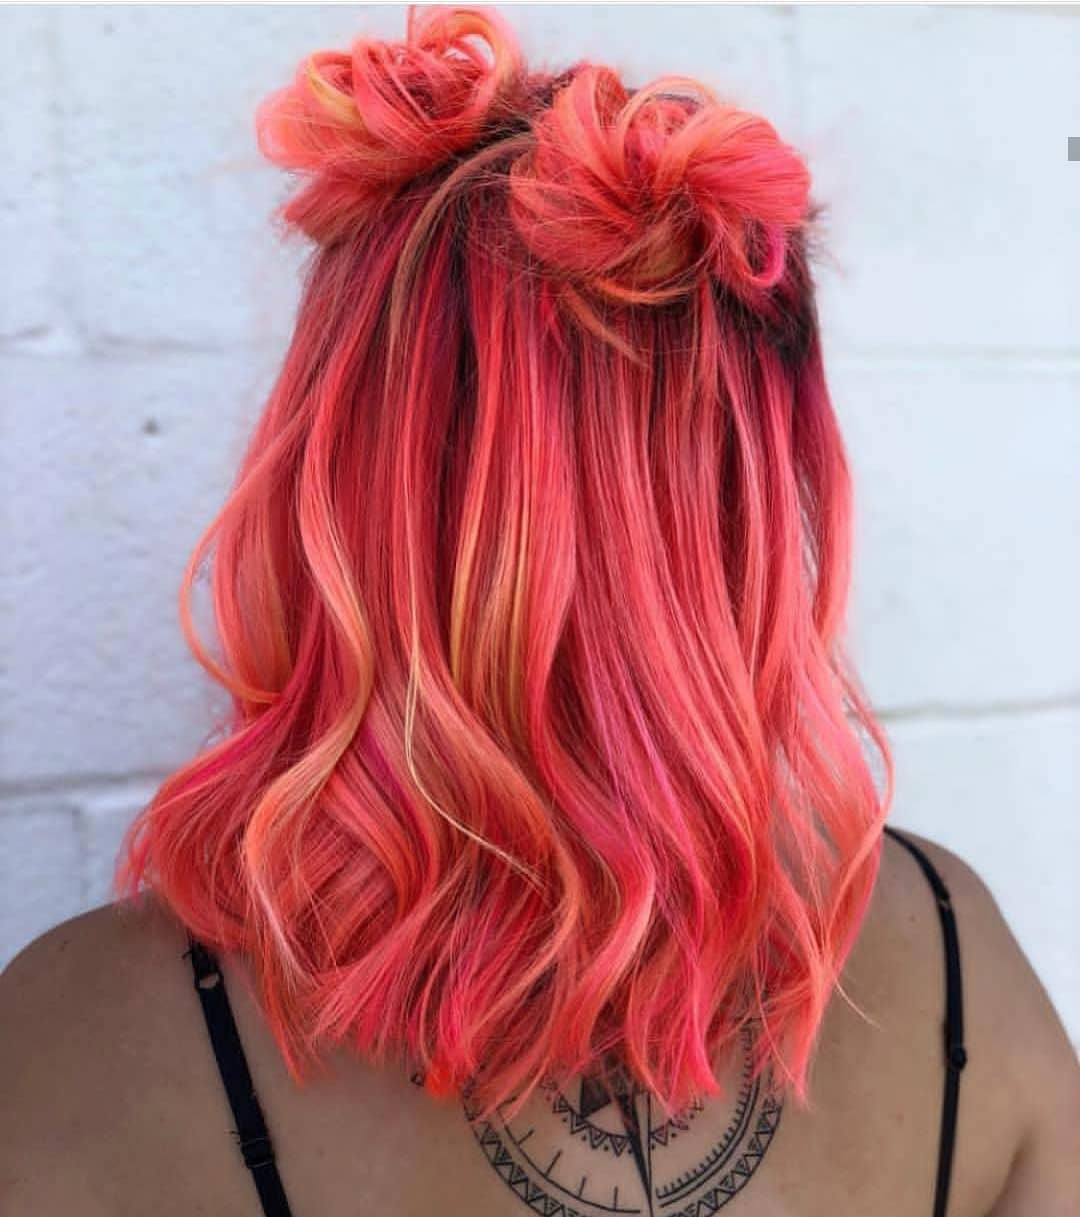 Red Pink Hair With Space Buns